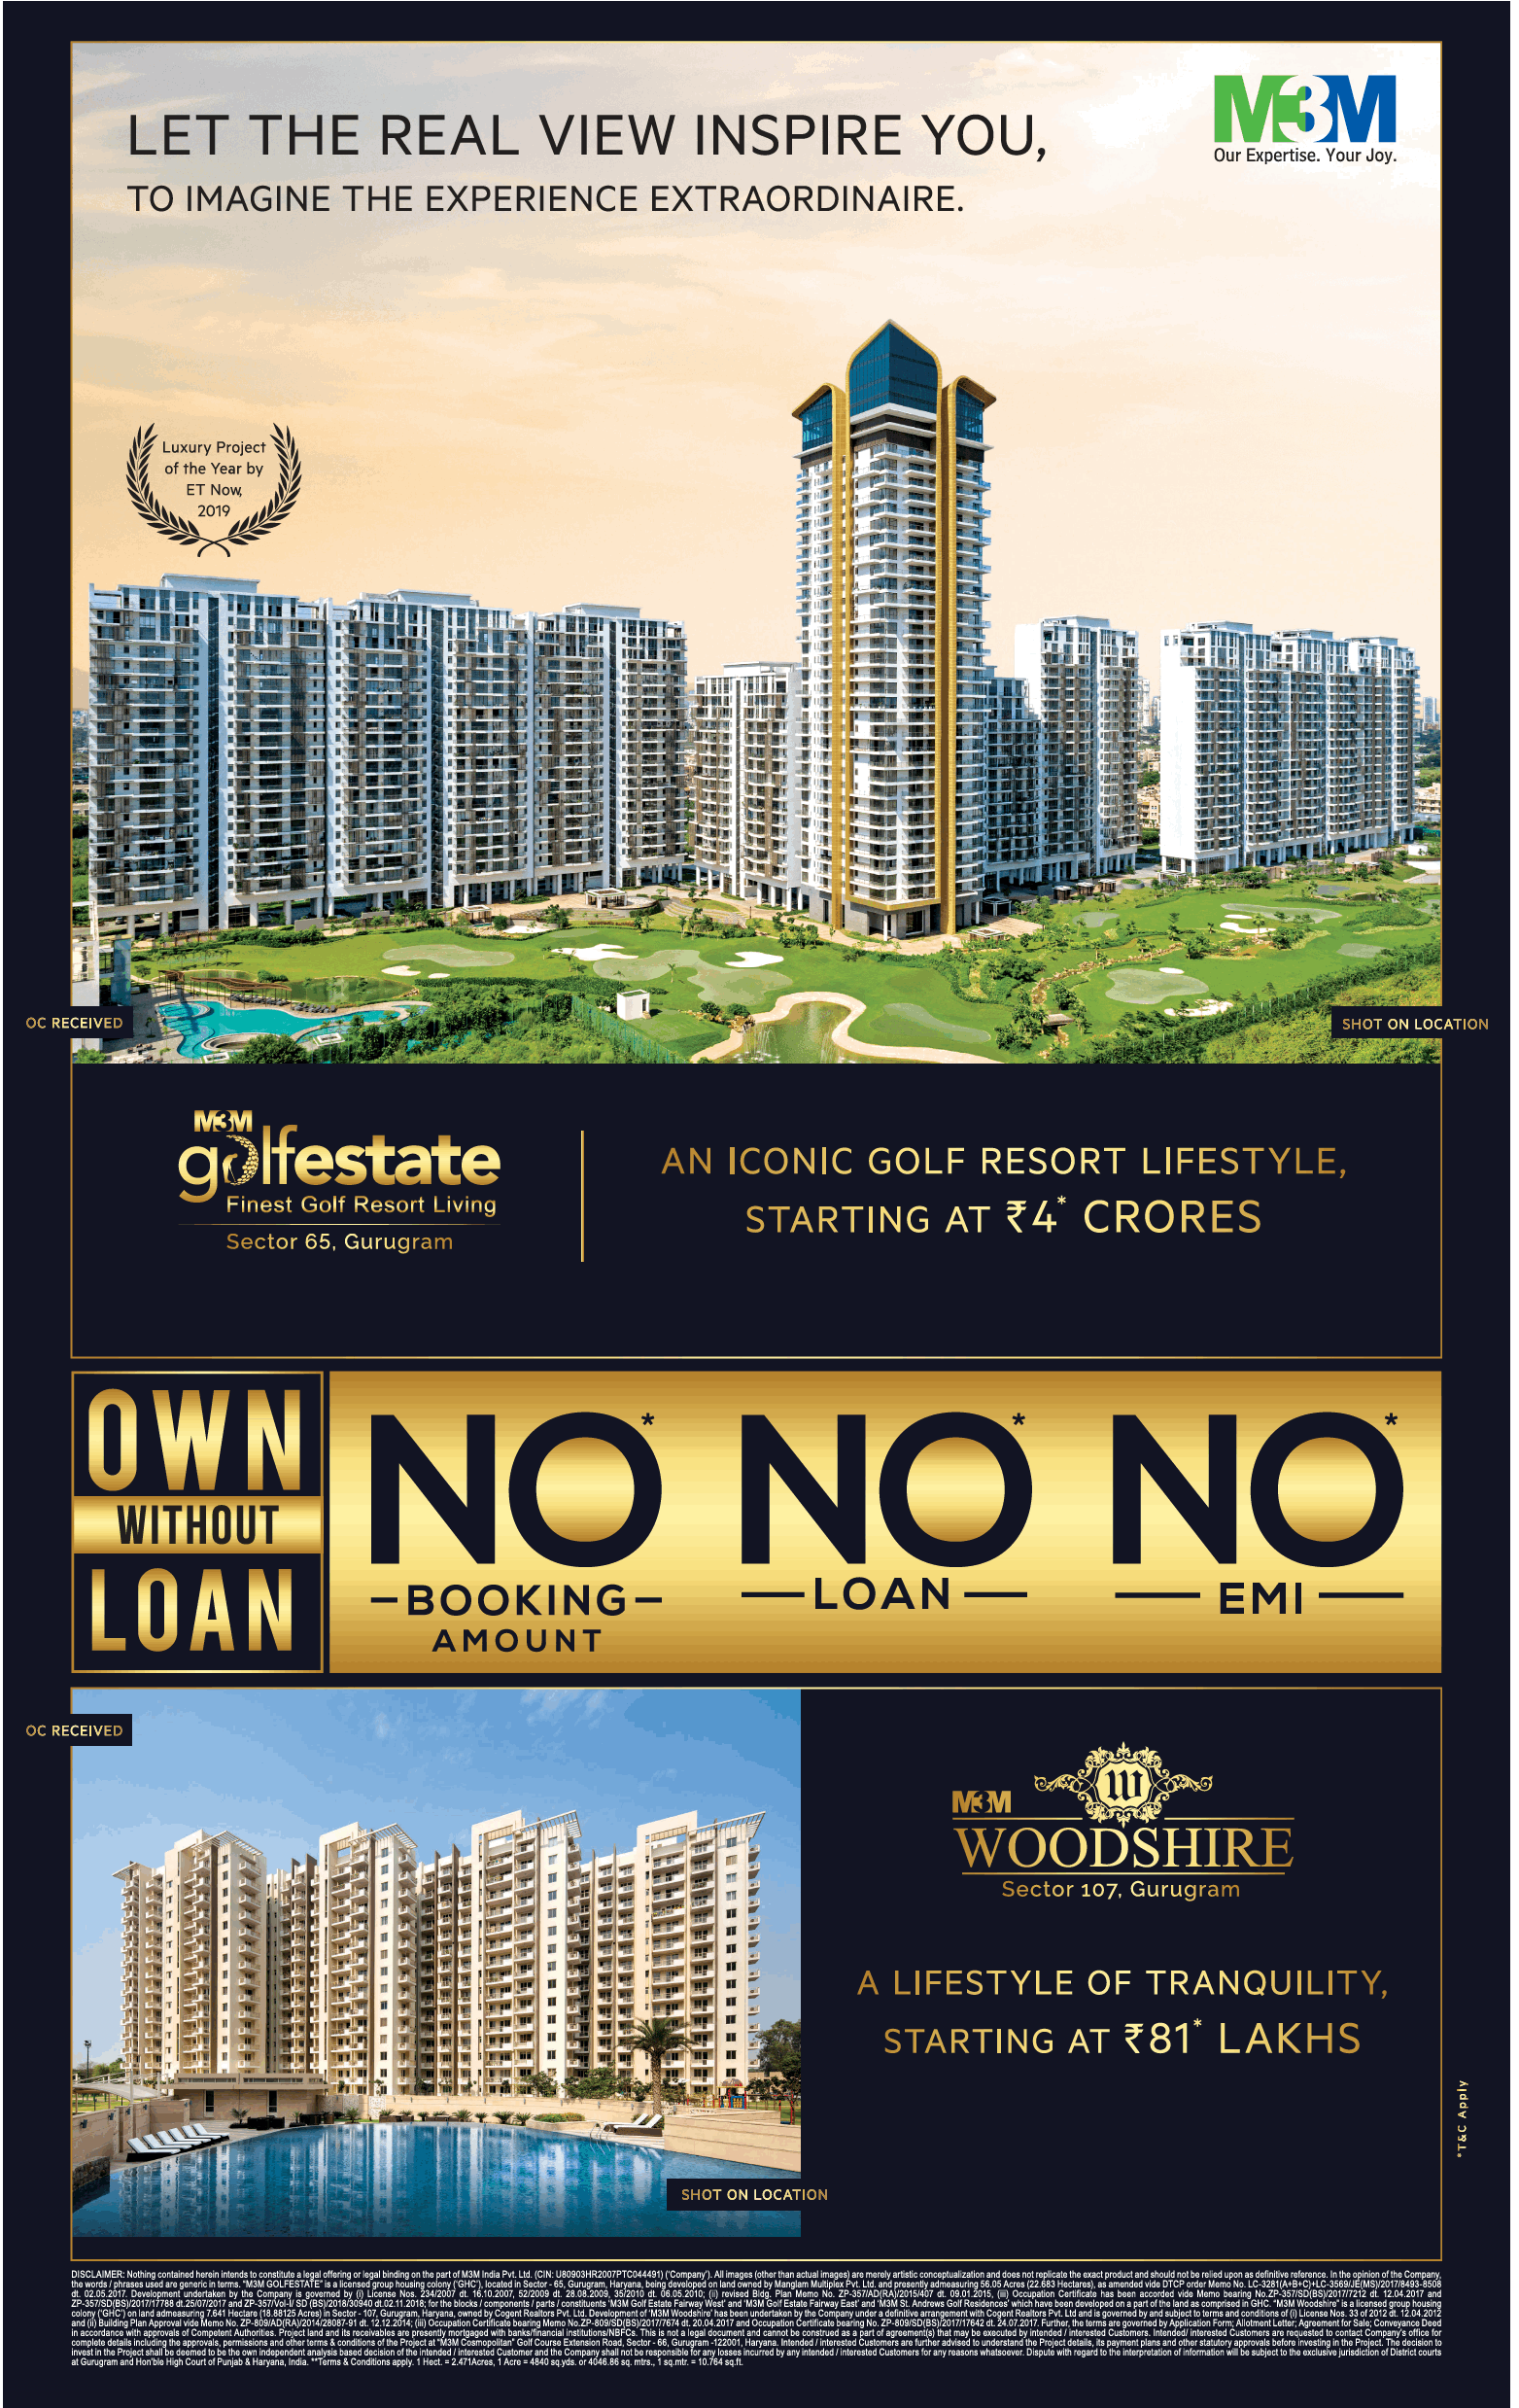 No booking amount, no loan, no EMI scheme at M3M Golf Estate and Woodshire in Gurgaon